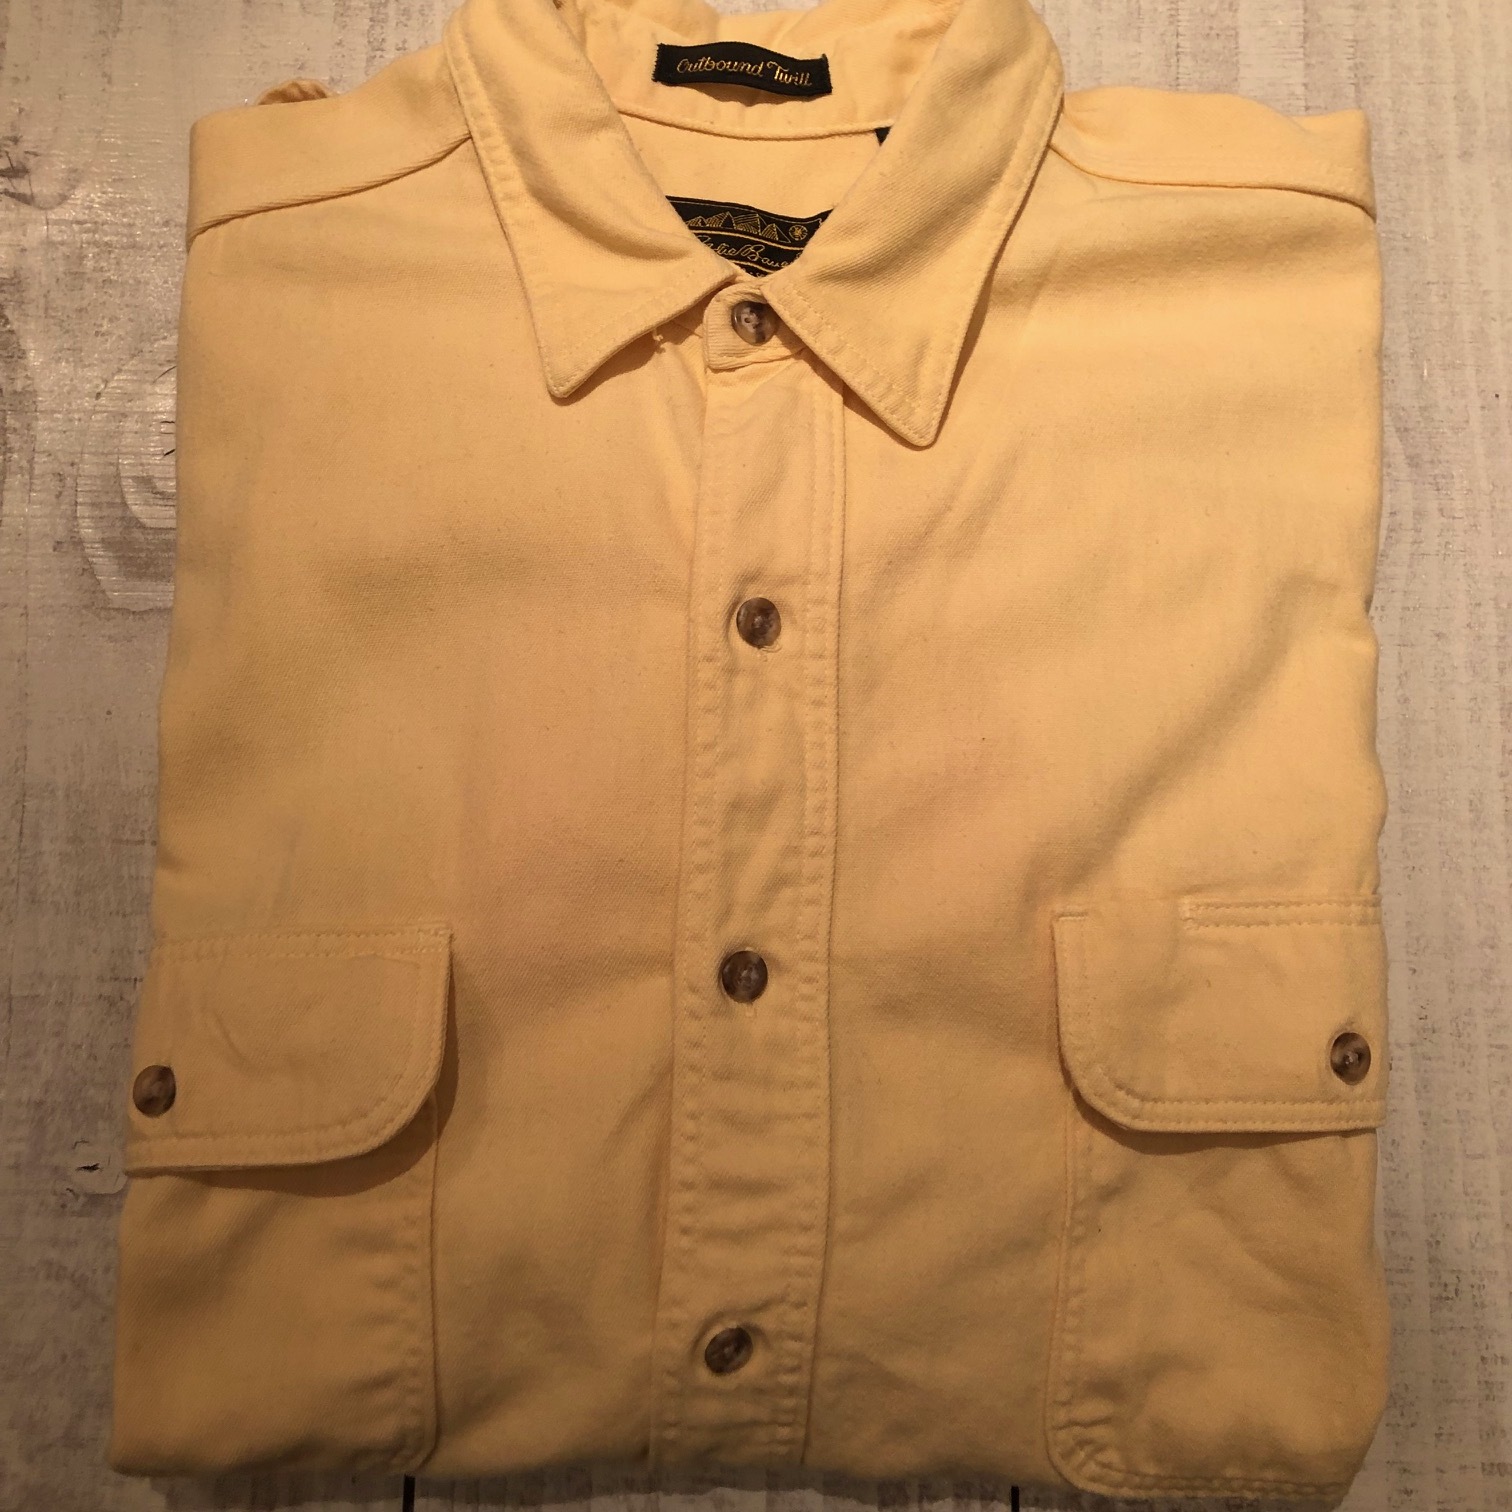 1990s \" EDDIE BAUER - made in U.S.A - \" ALL cotton HEAVY-WEIGHT SOLID L/S WORK SHIRTS ※ ライトイエロー_d0172088_20080985.jpg